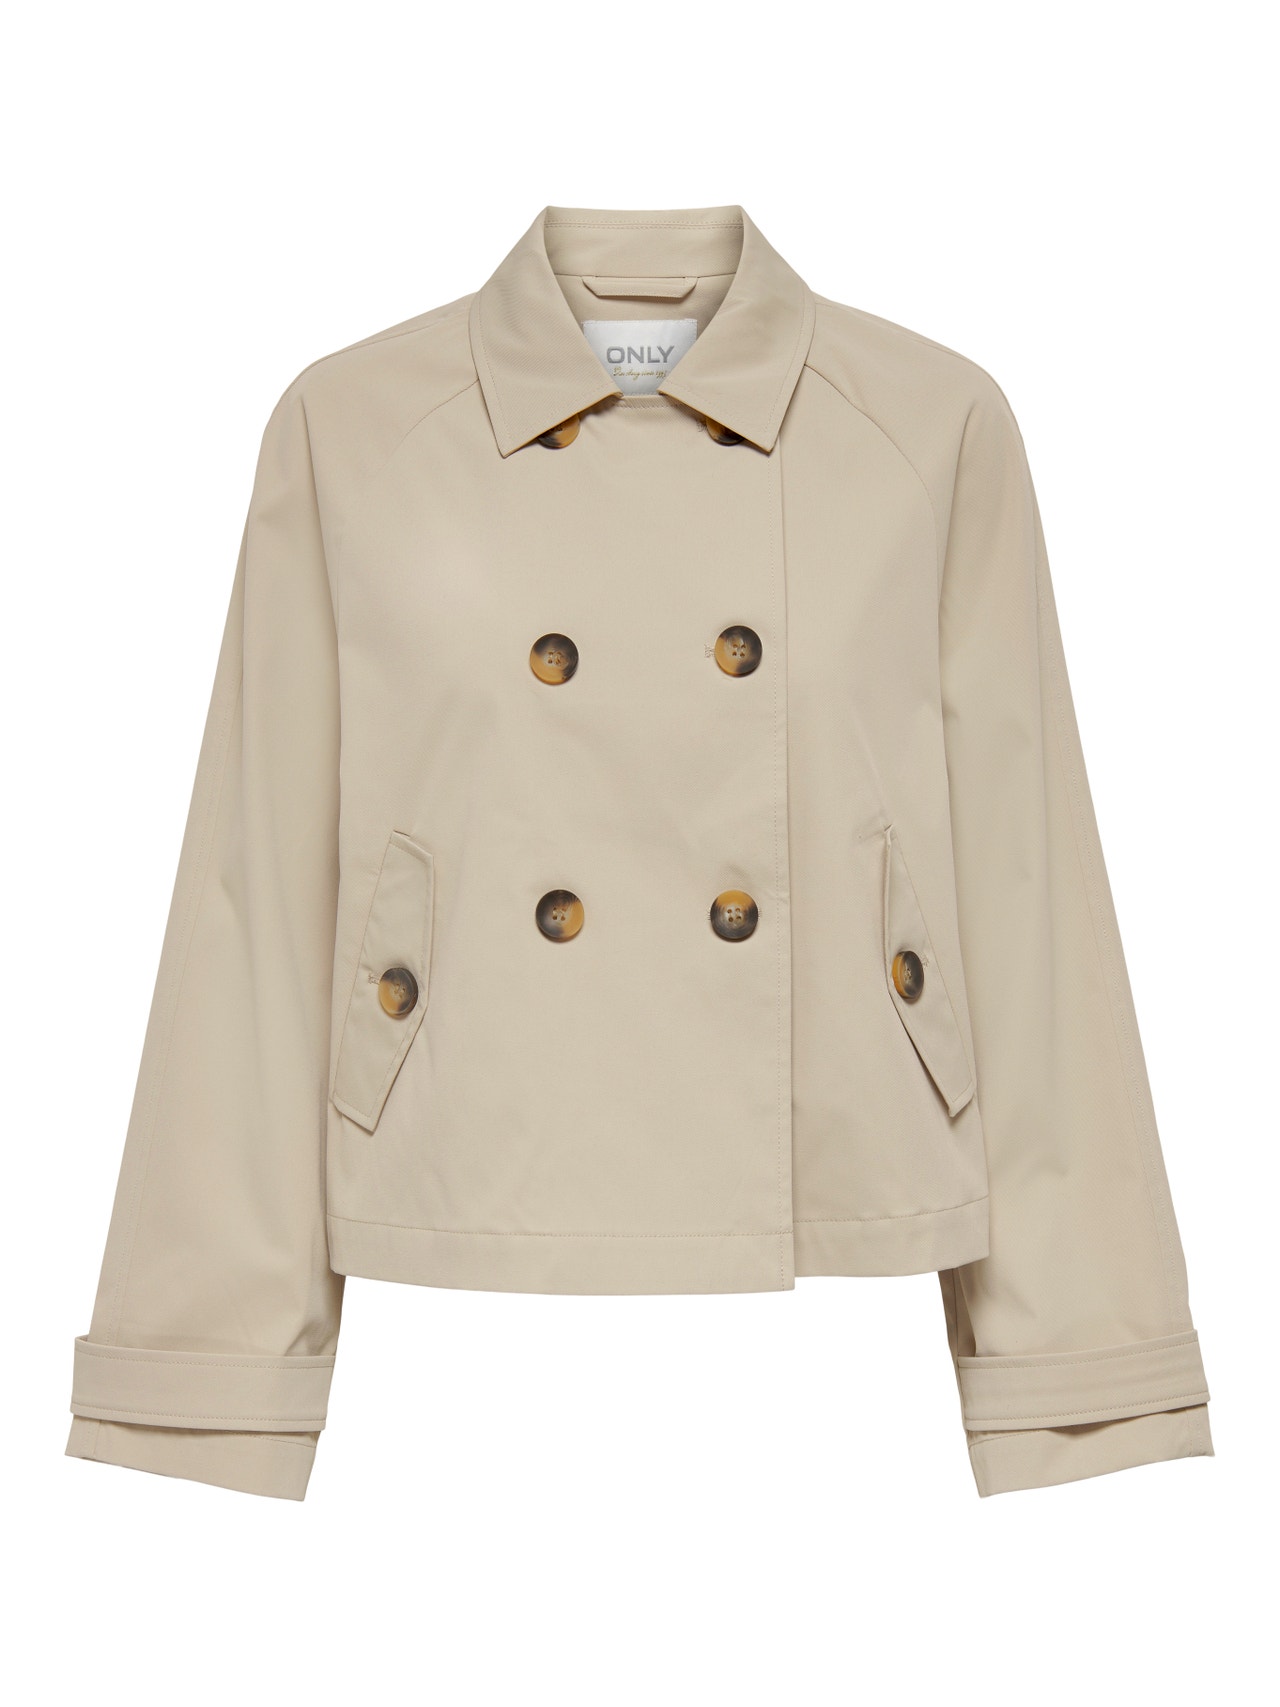 ONLY Short trenchcoat -Oxford Tan - 15274982